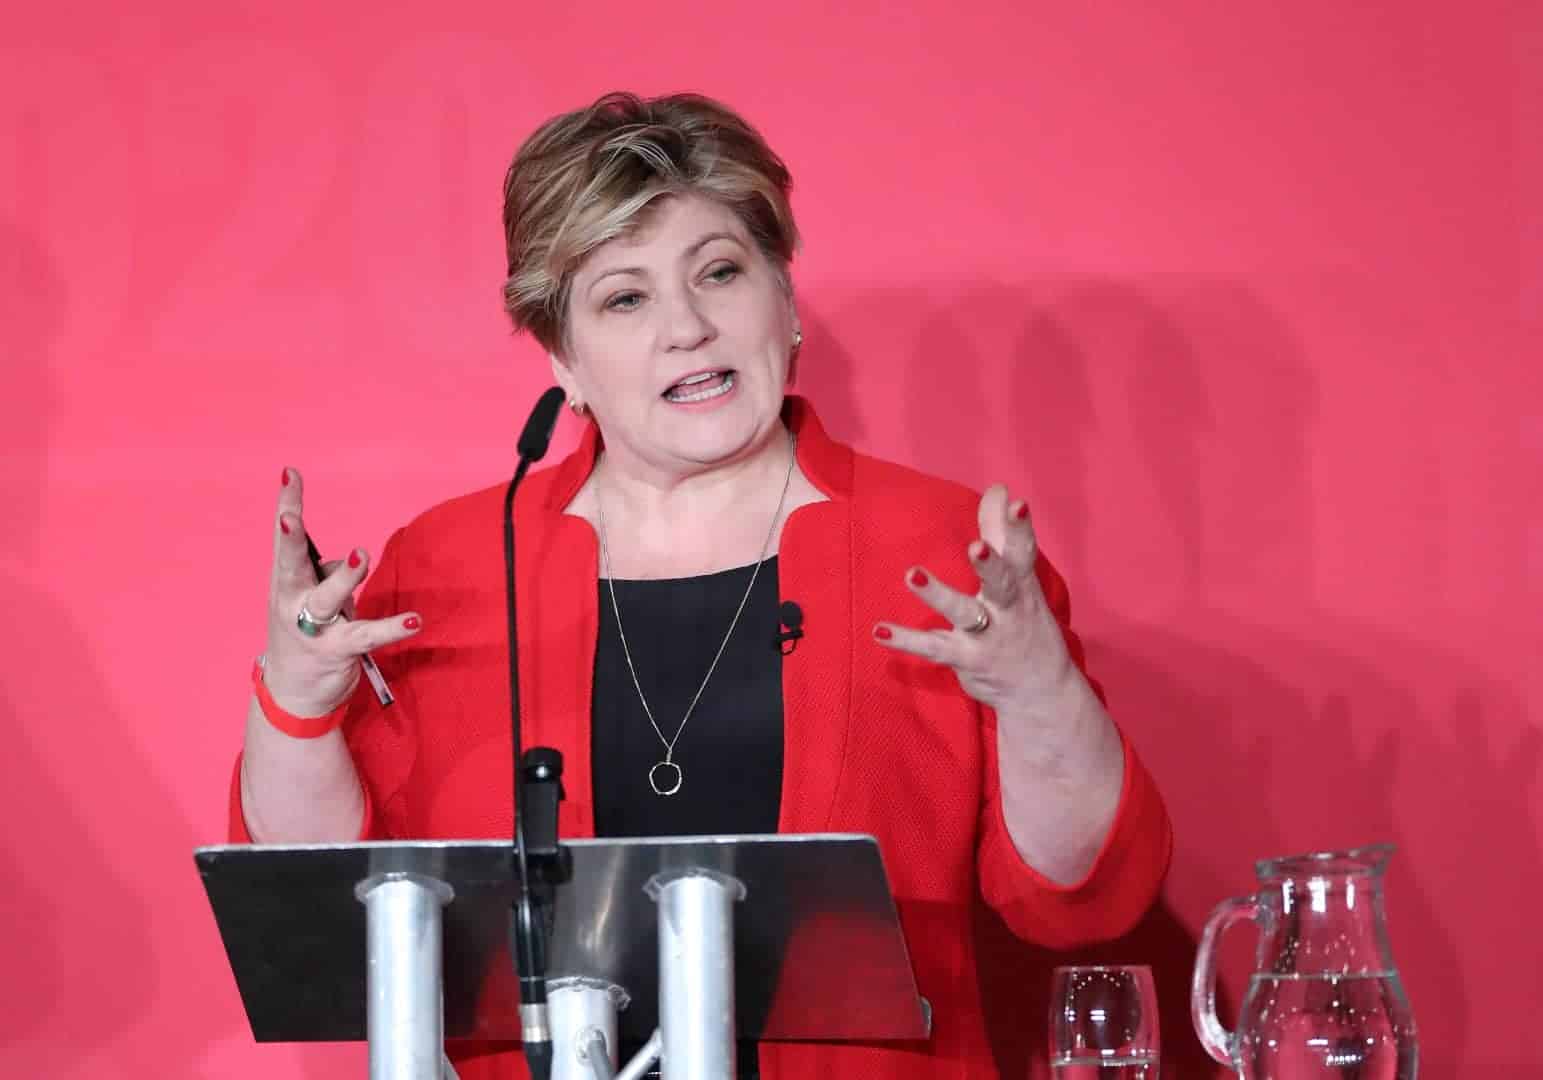 Emily Thornberry eliminated in Labour leadership race to succeed Jeremy Corbyn